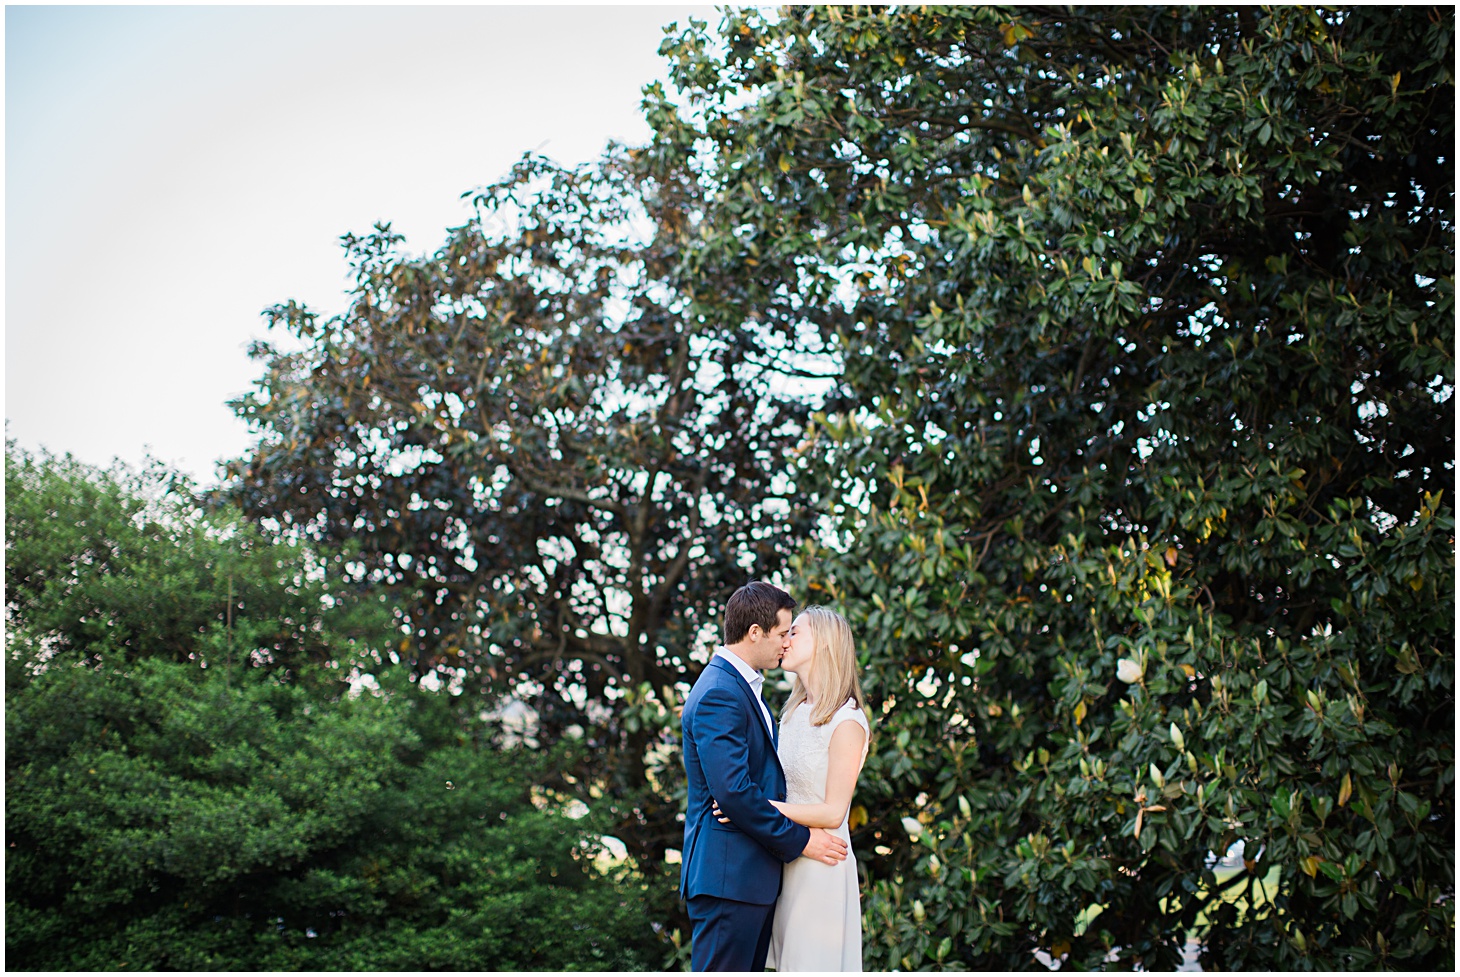 intimate-sunrise-engagement-session-at-the-lincoln-memorial-by-sarah-bradshaw-photography_0010